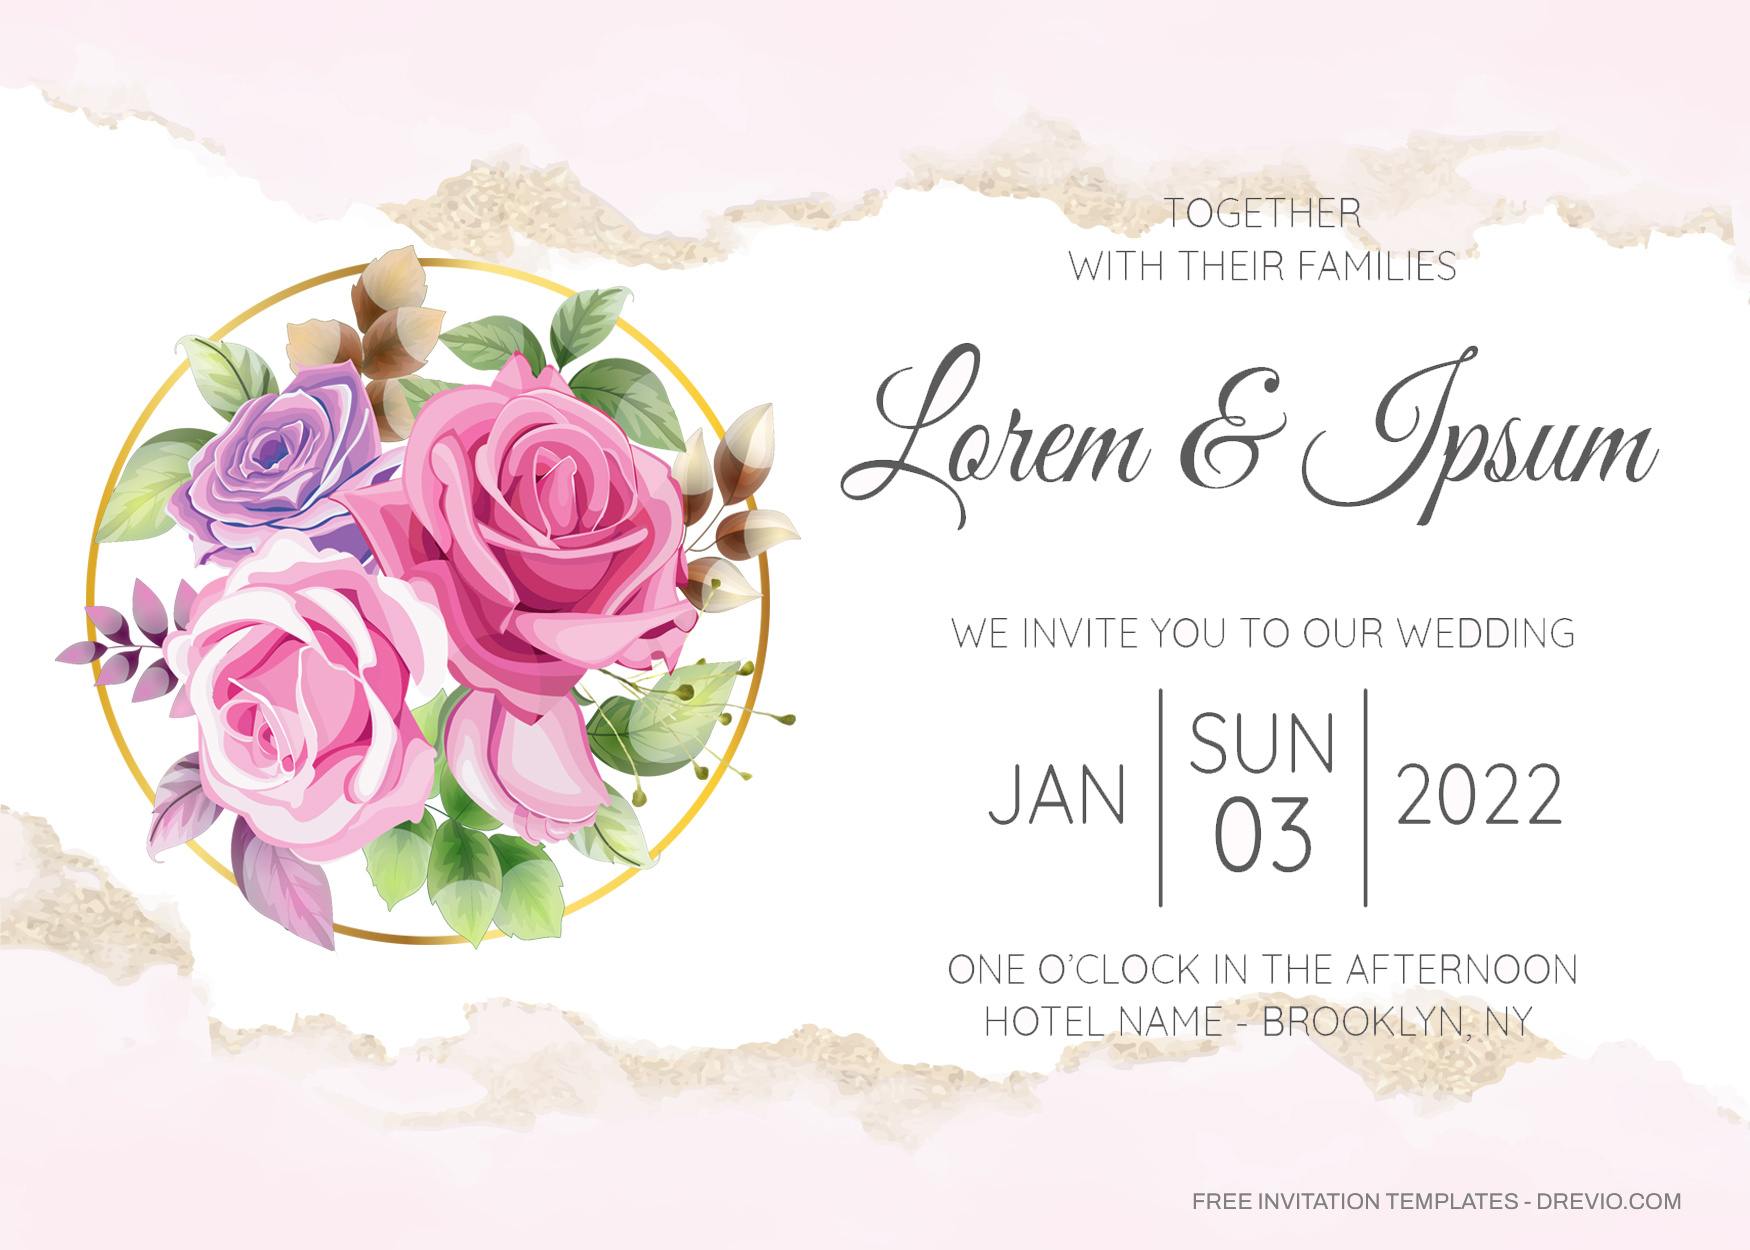 10+ Brownish Delight Roses Floral Invitation Template